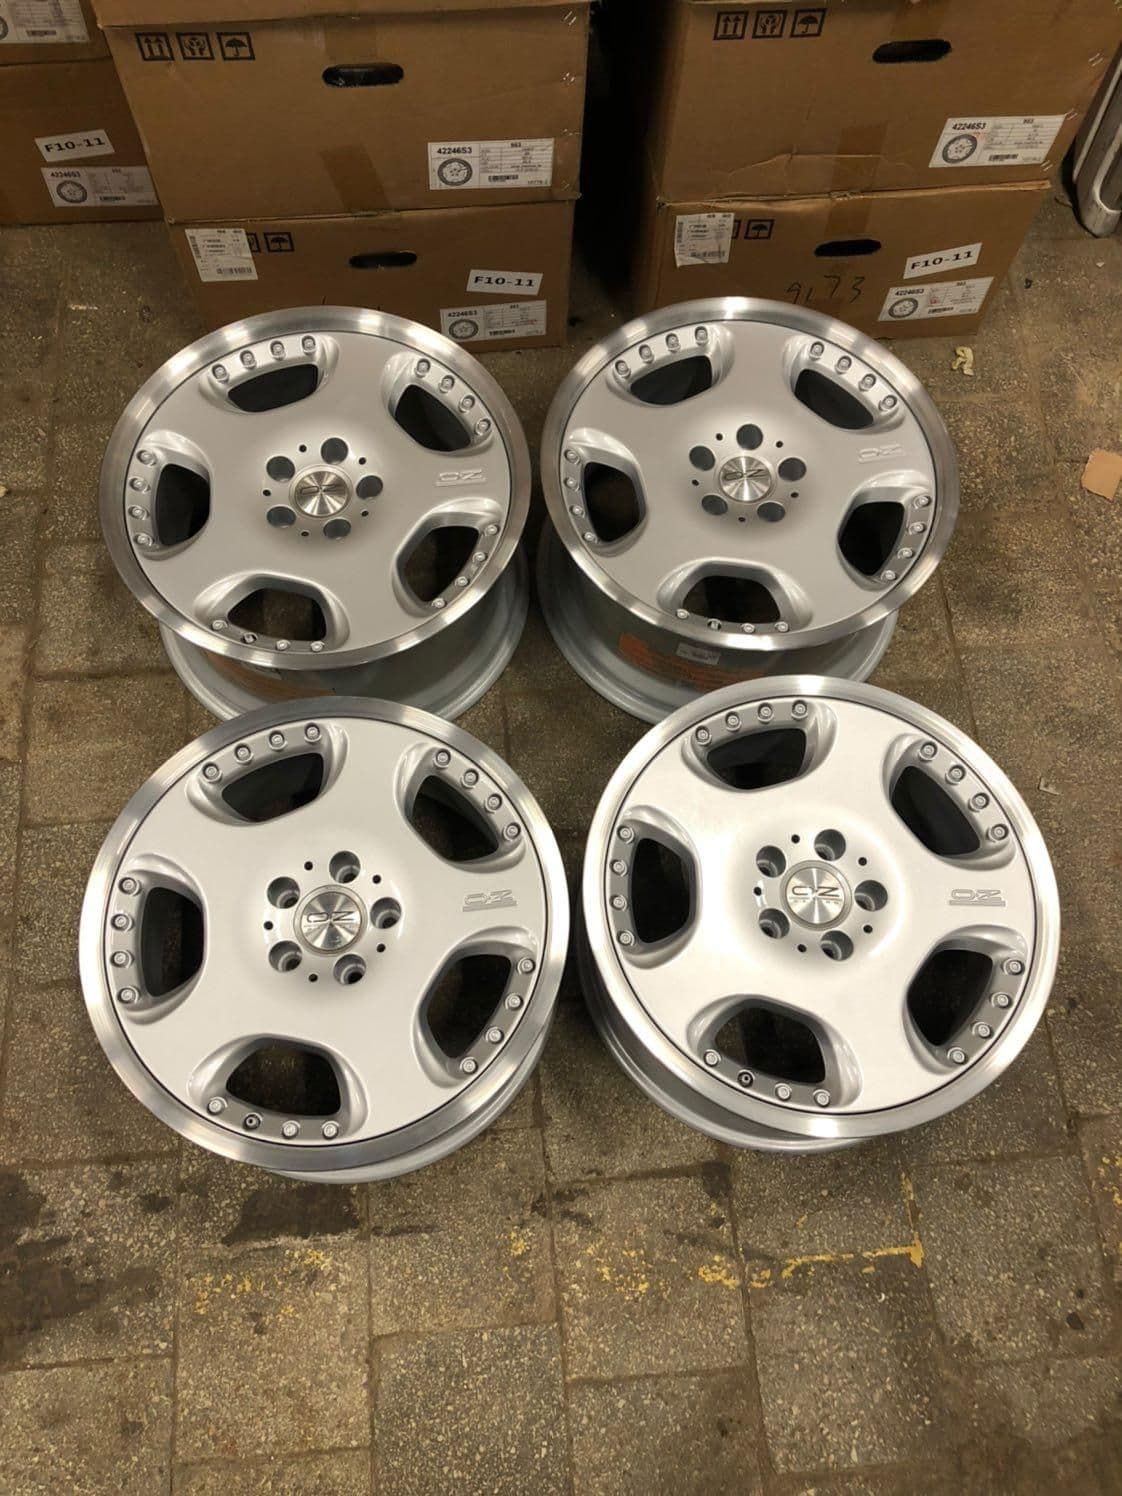 Wheels and Tires/Axles - OZ Racing Opera 2 5x112 - Used - 0  All Models - Parma, OH 44134, United States